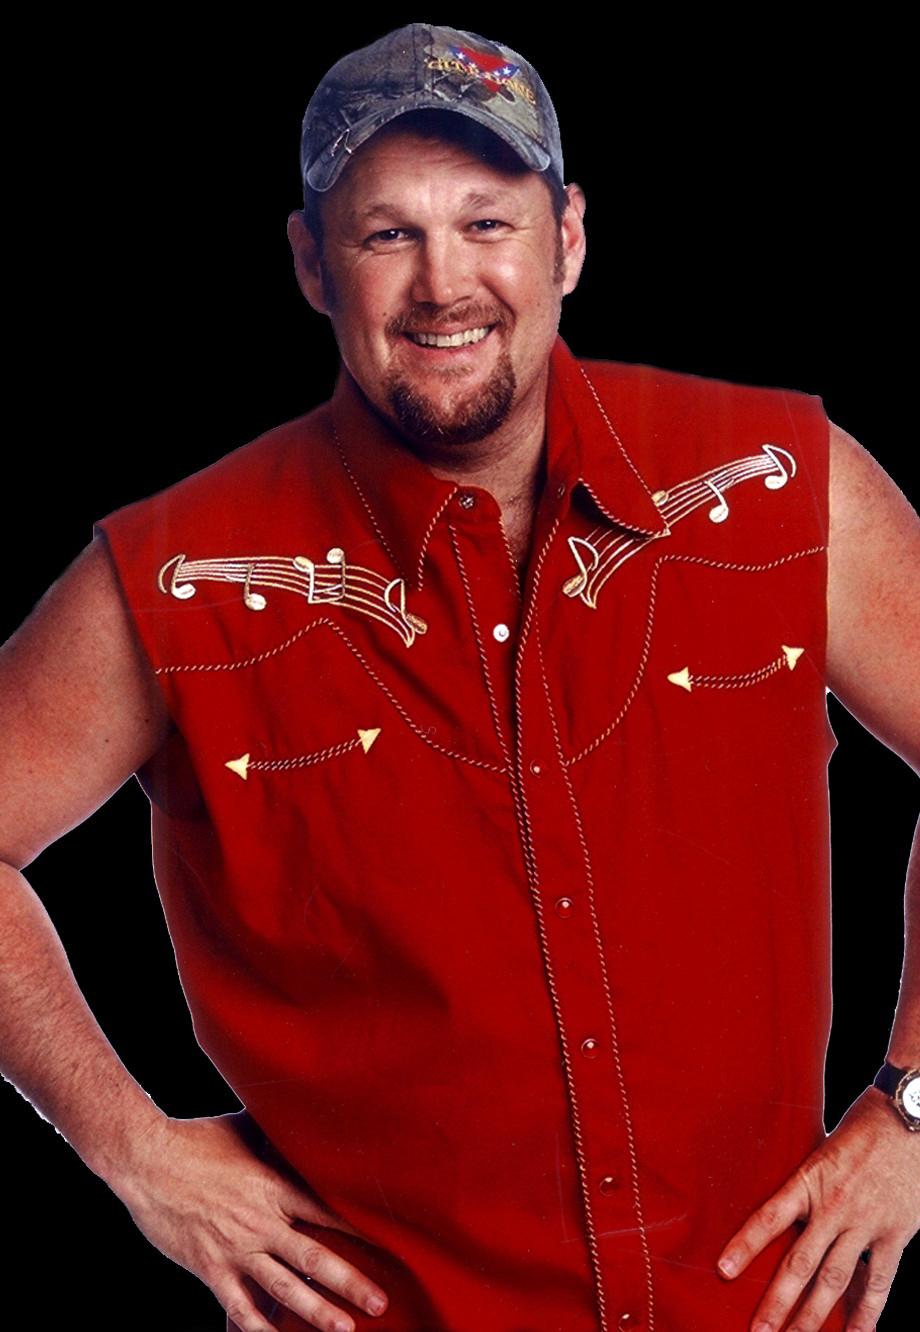 larry the cable guy in concert